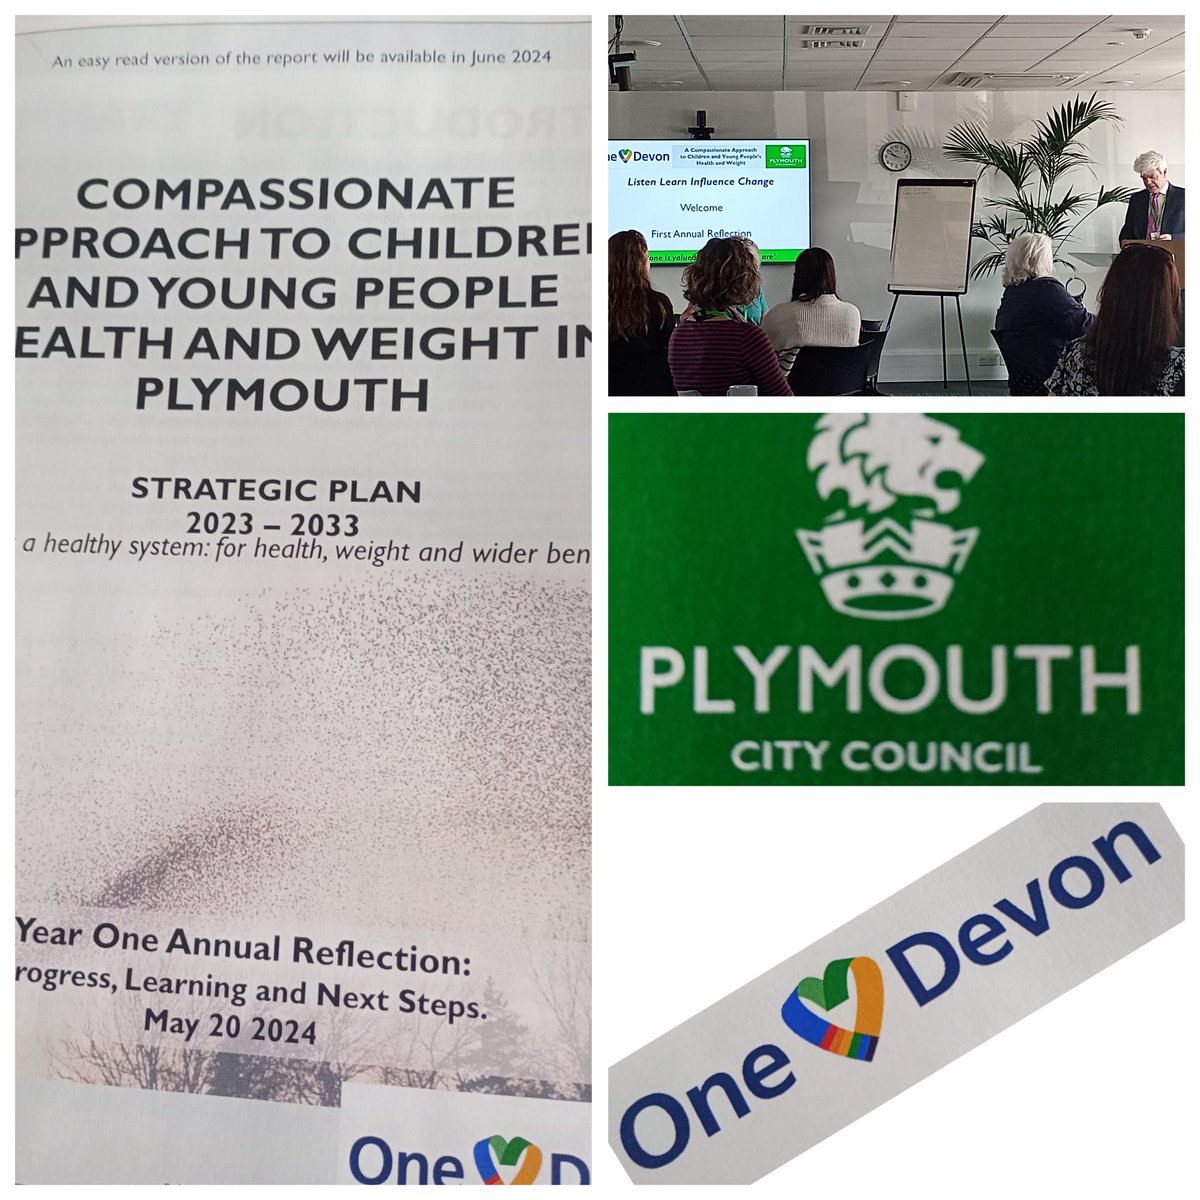 Inspired 2b here this morning, celebrating excellent achievements of #compassionate approach to #children & #youngpeople (health & weight) #Plymouth @PHPlymouth #OneDevon Great to see @foodsequal 'model' of #coproduction mentioned in strategy #impact #collaboration #community